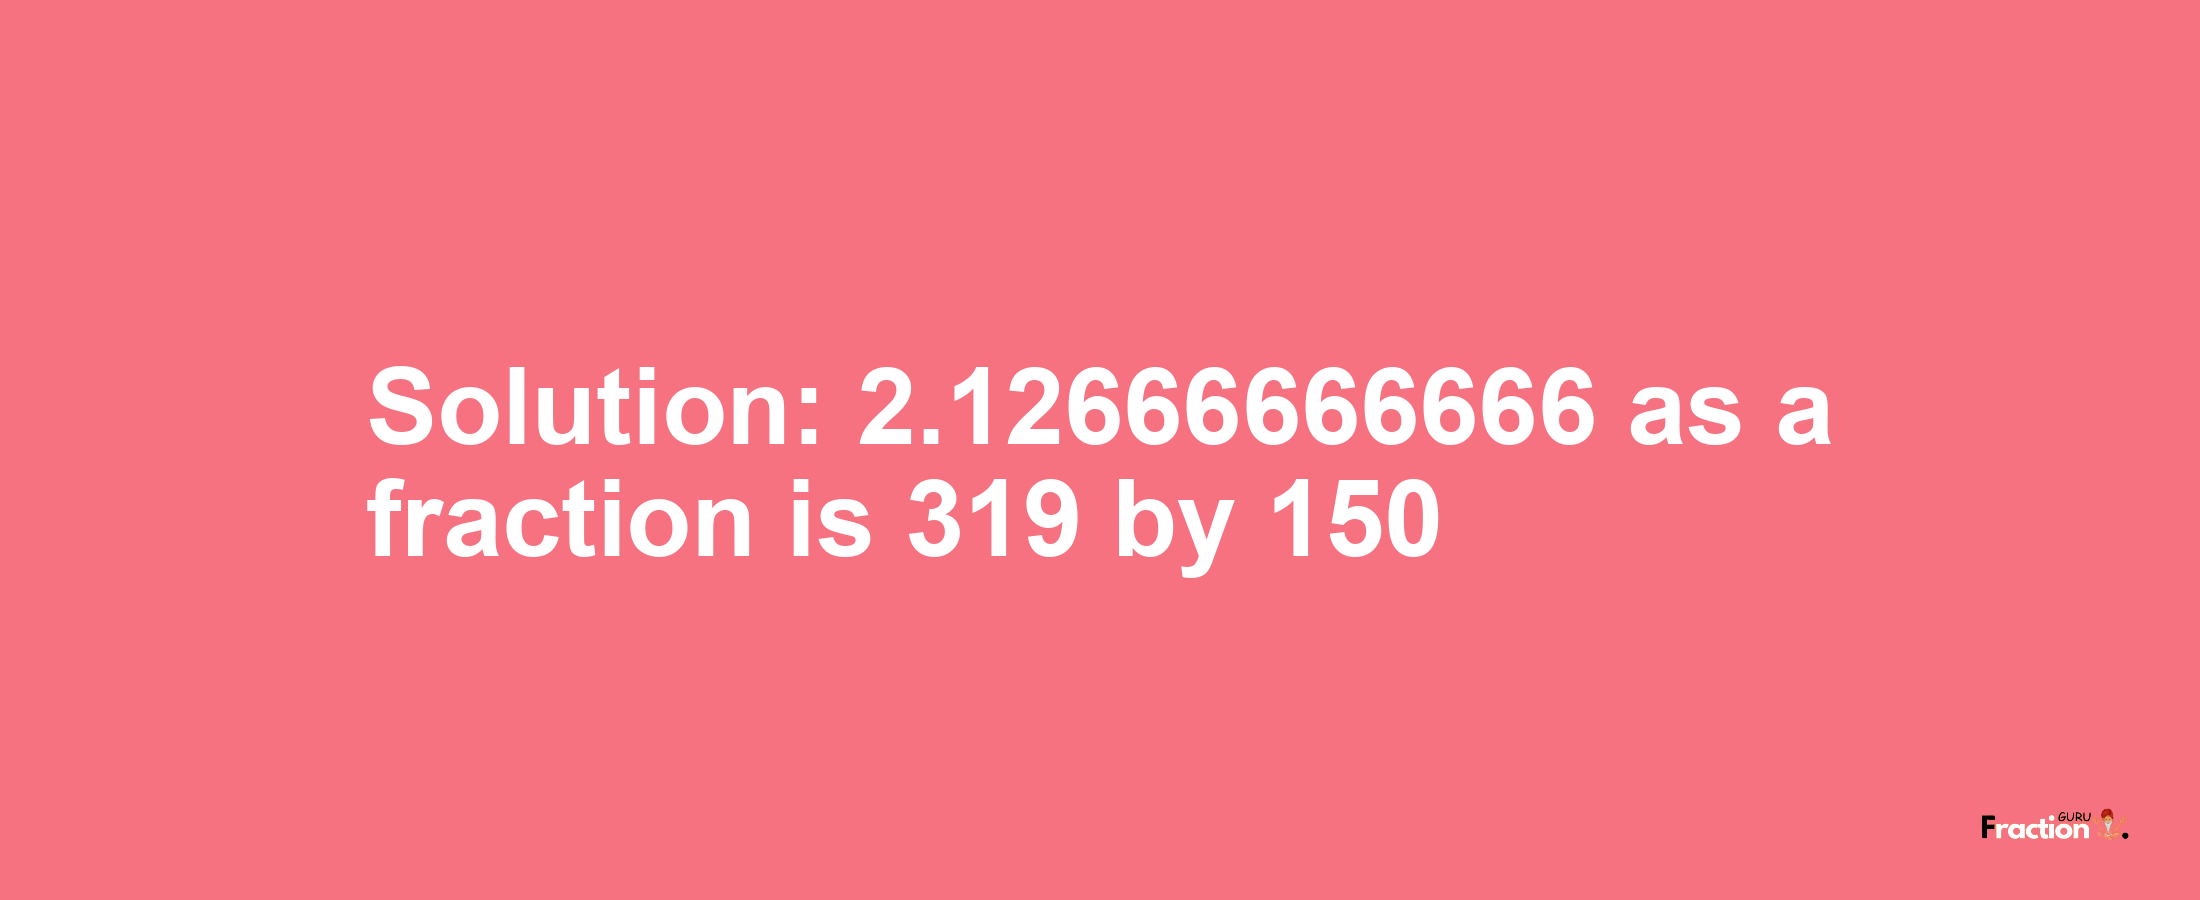 Solution:2.12666666666 as a fraction is 319/150